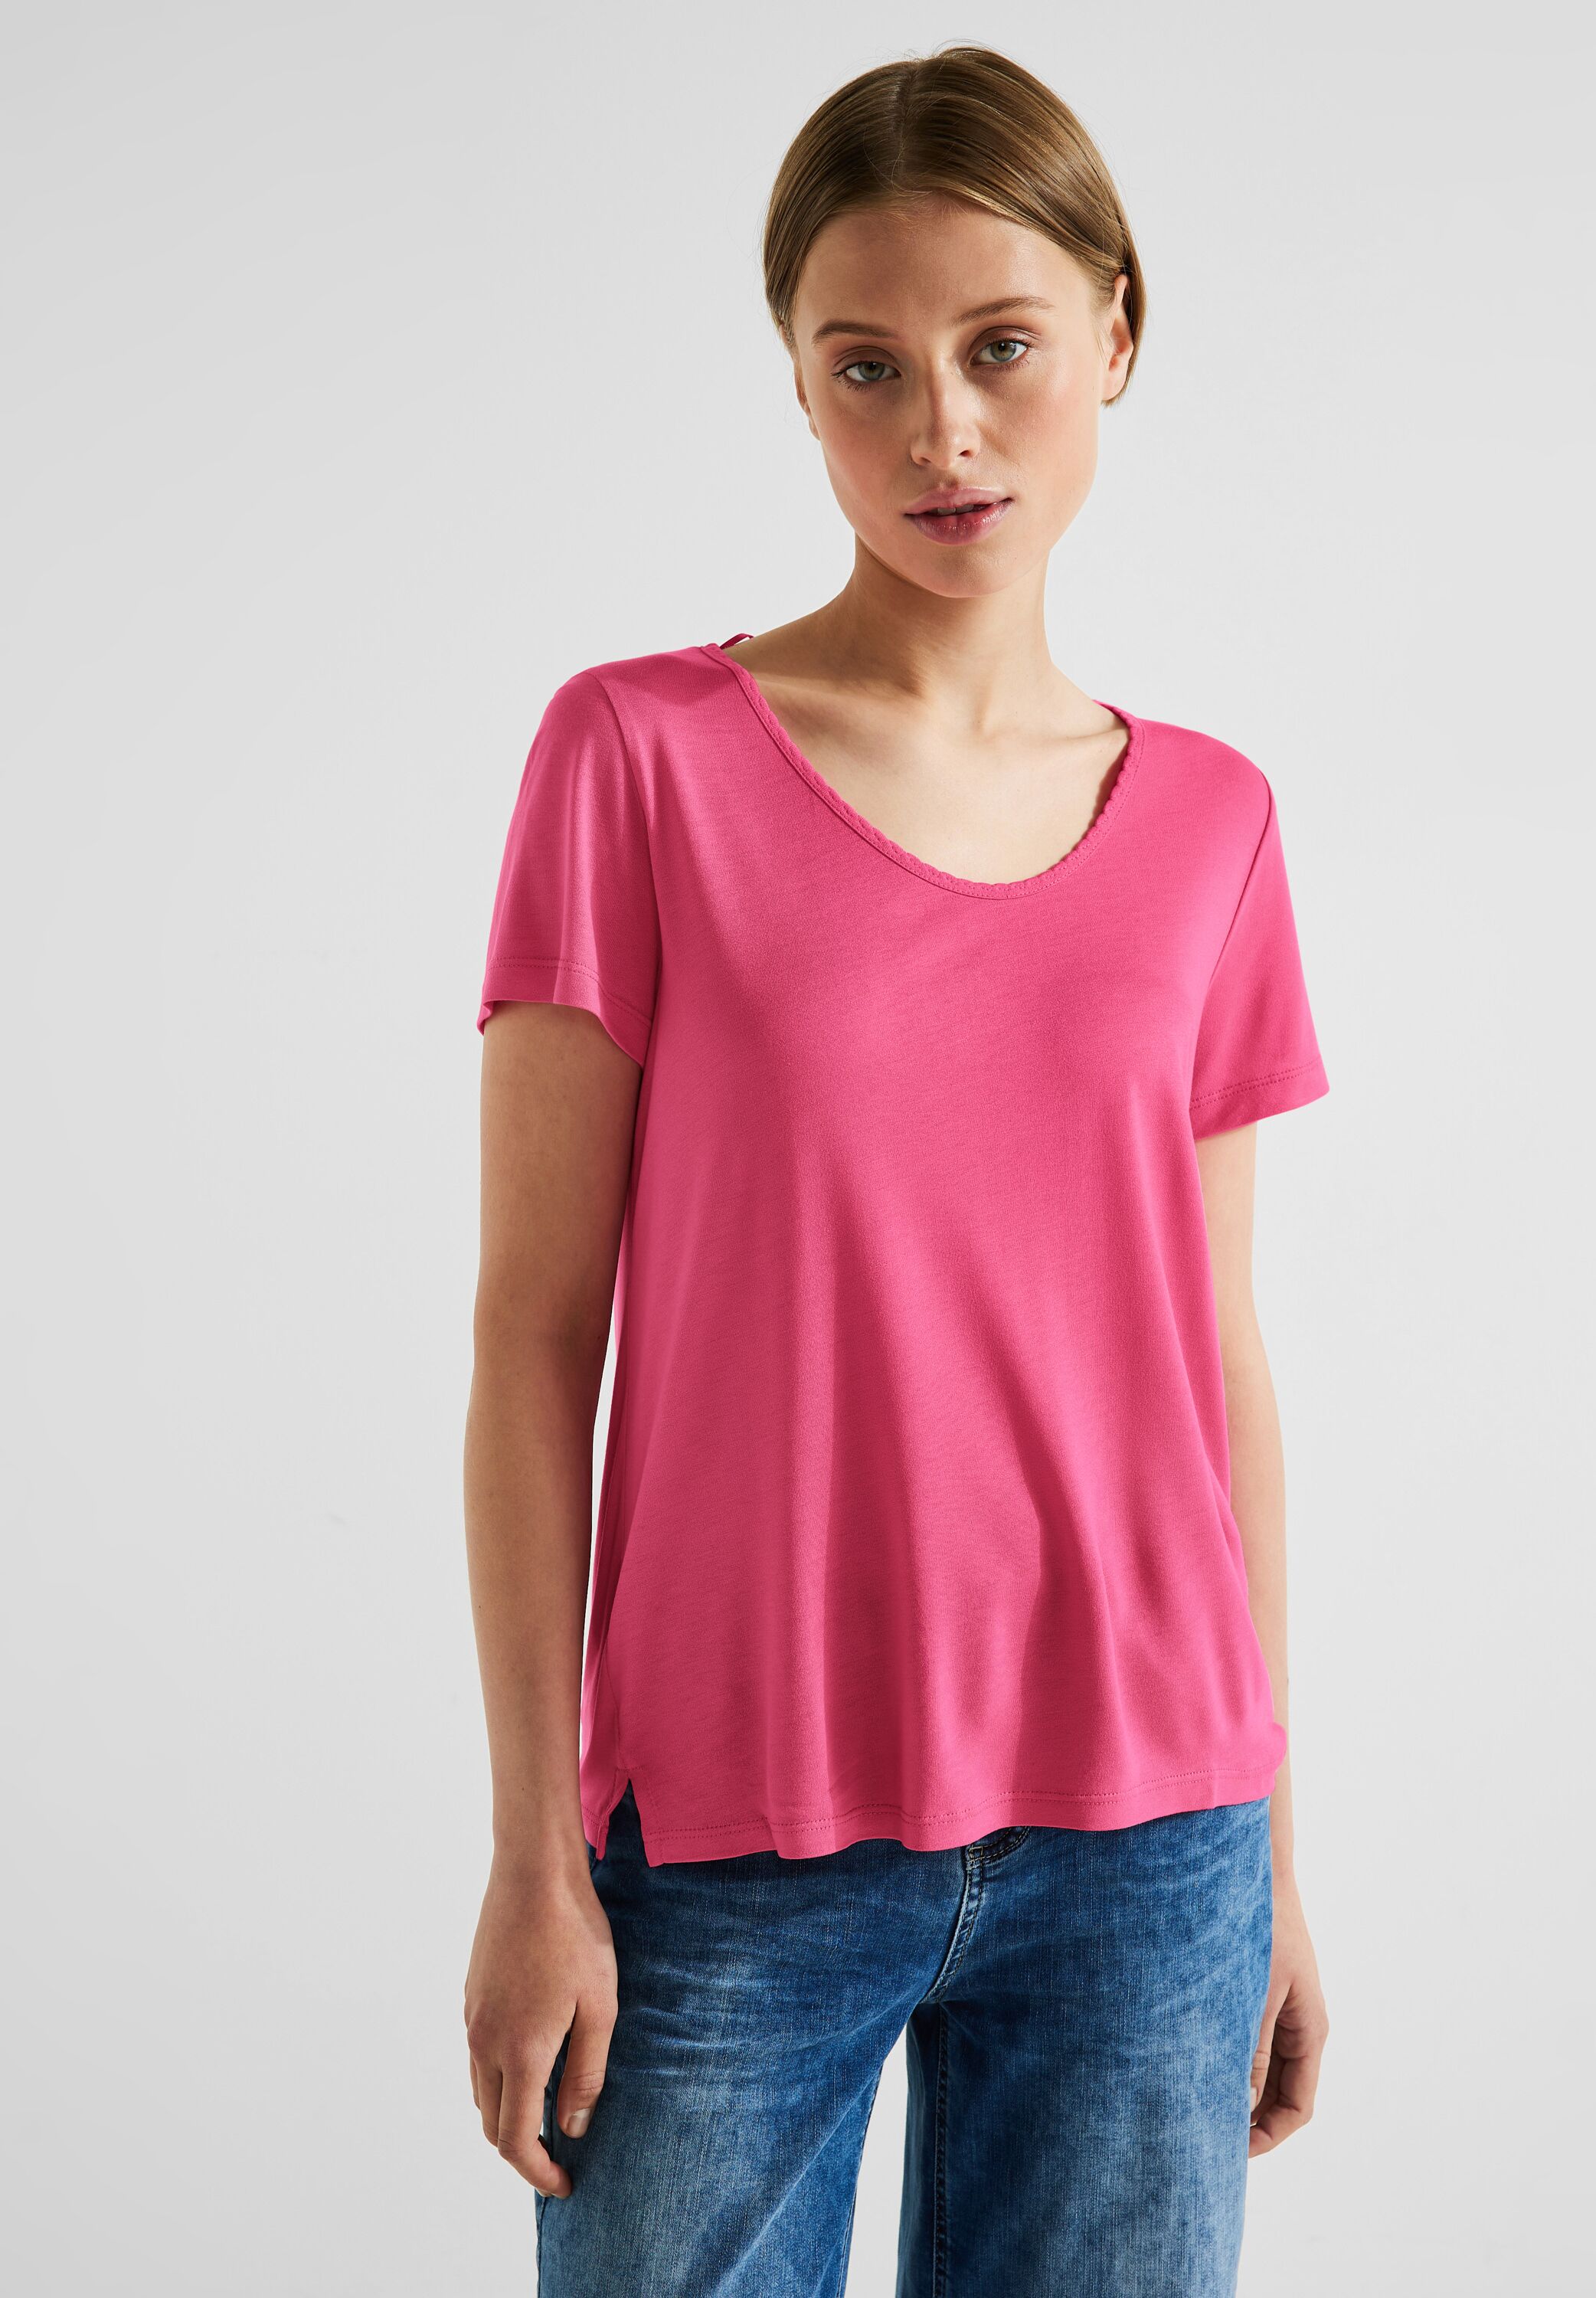 reduziert Street Mode SALE CONCEPT Berry - in T-Shirt One im A320124-14647 Rose